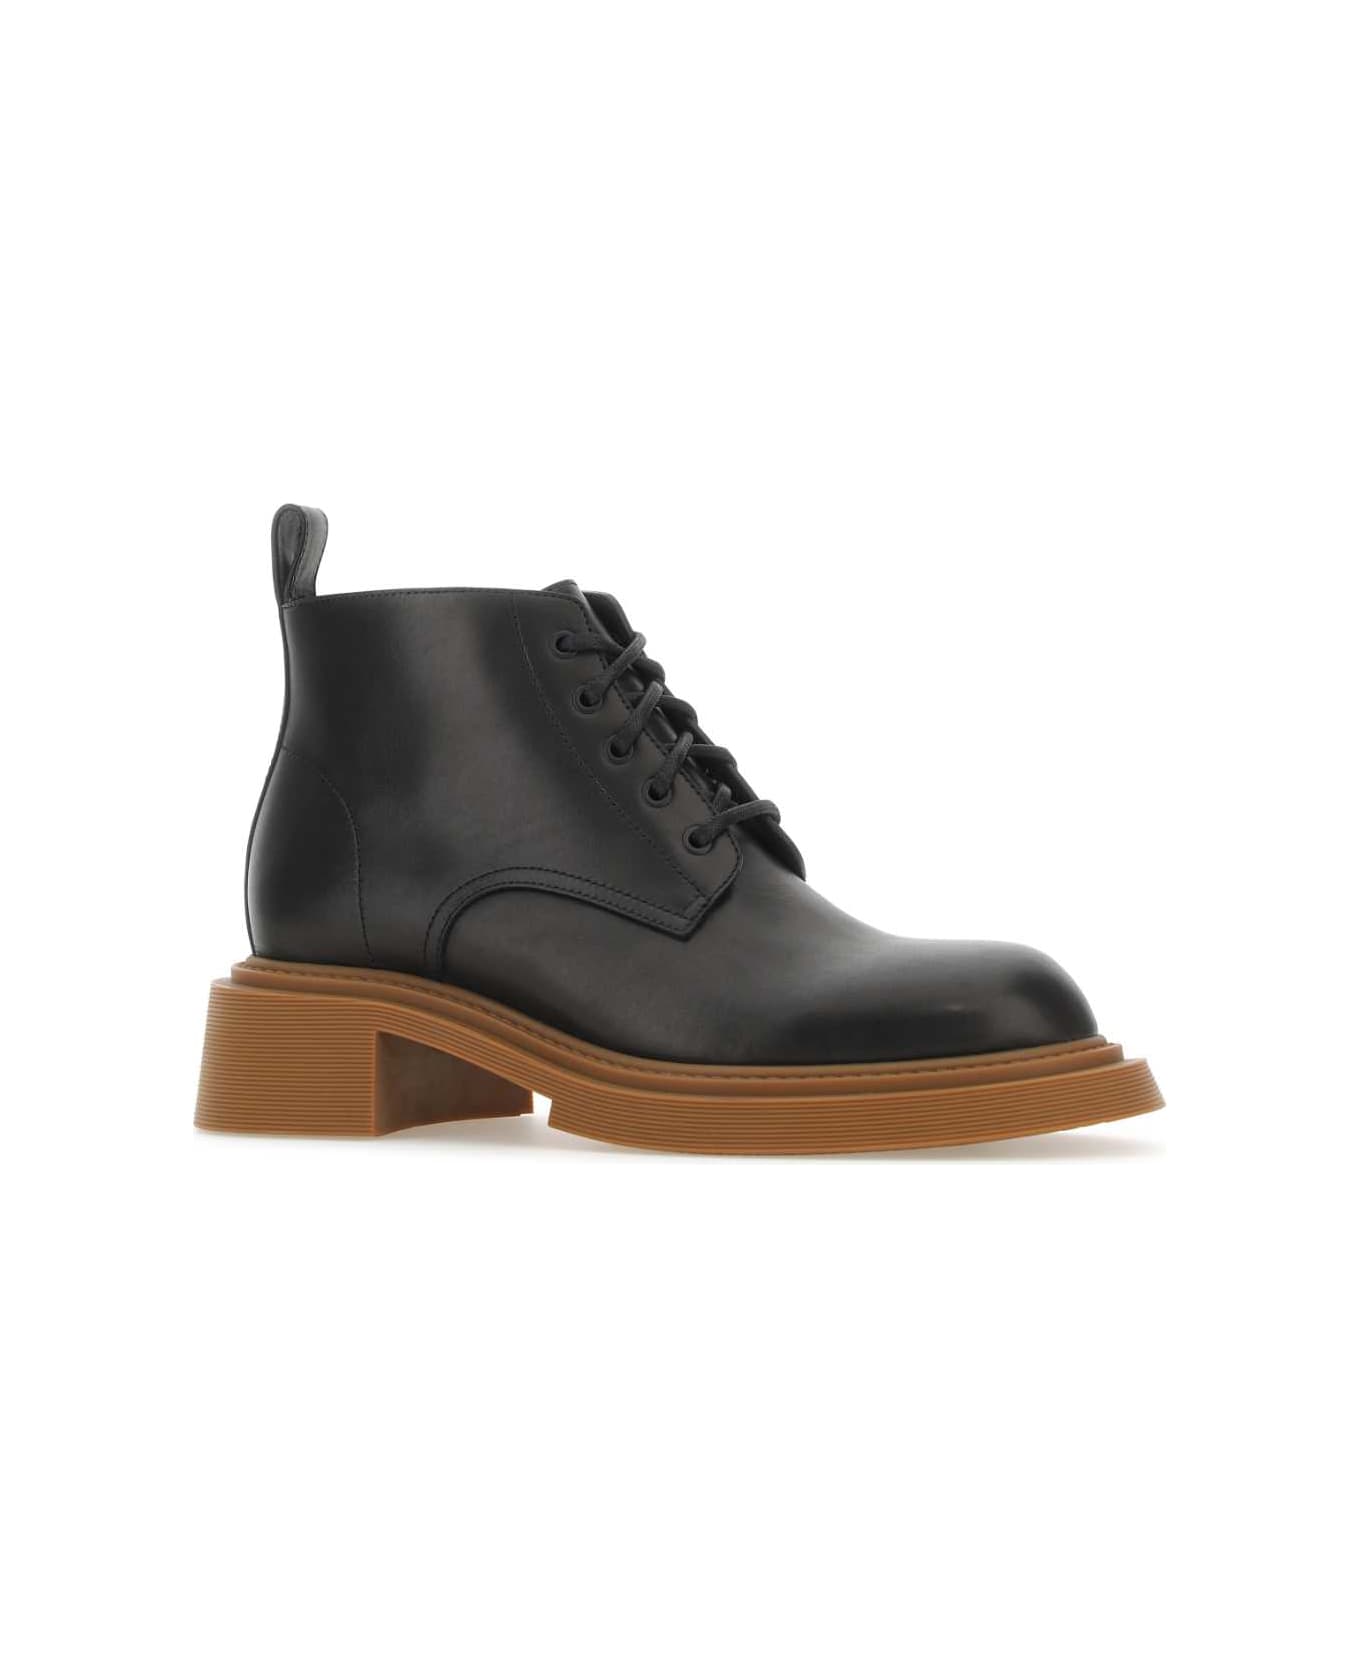 Loewe Black Leather Ankle Boots - BLACK ブーツ